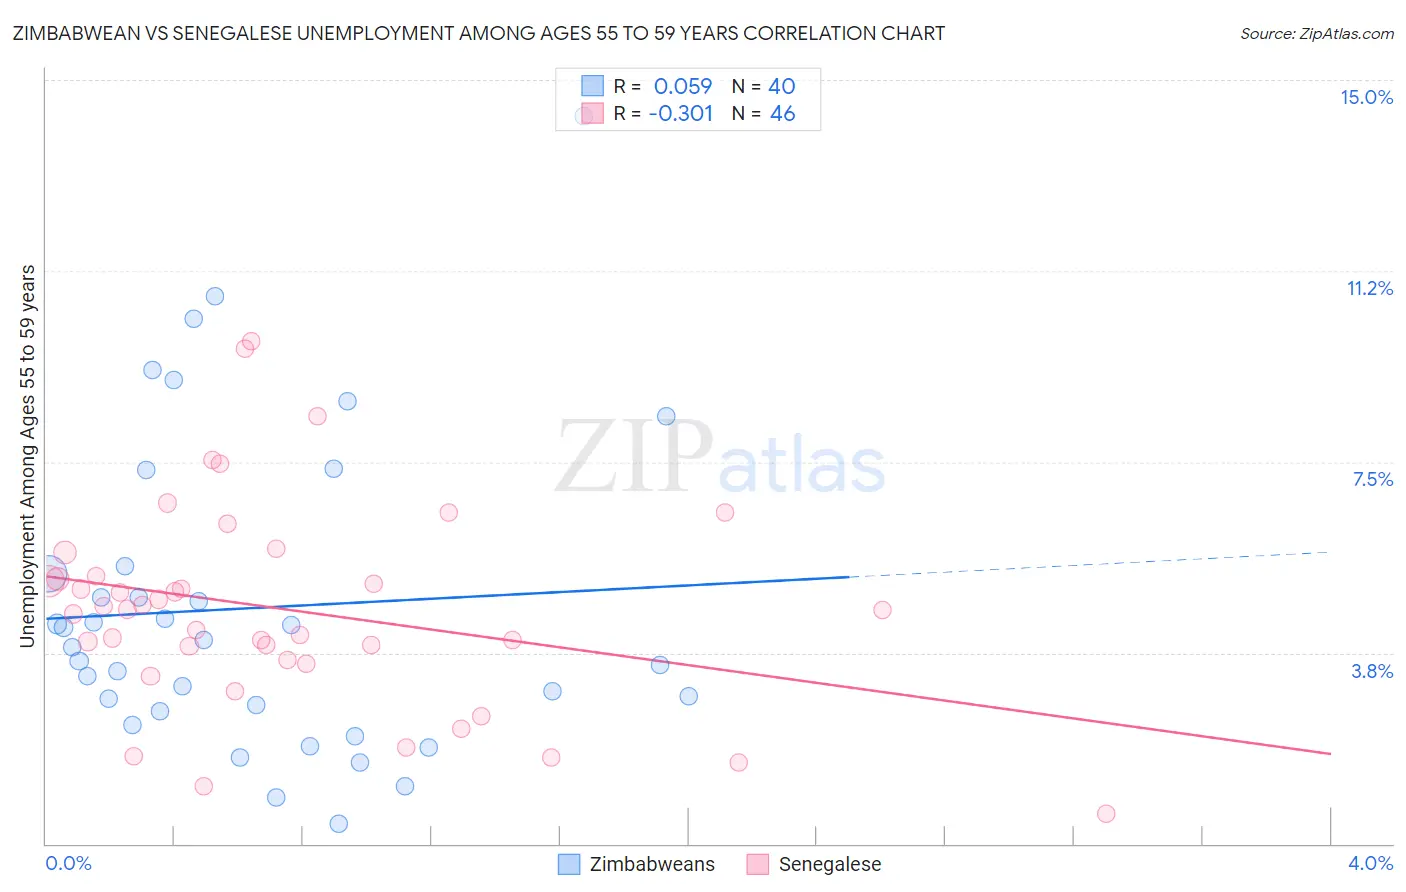 Zimbabwean vs Senegalese Unemployment Among Ages 55 to 59 years